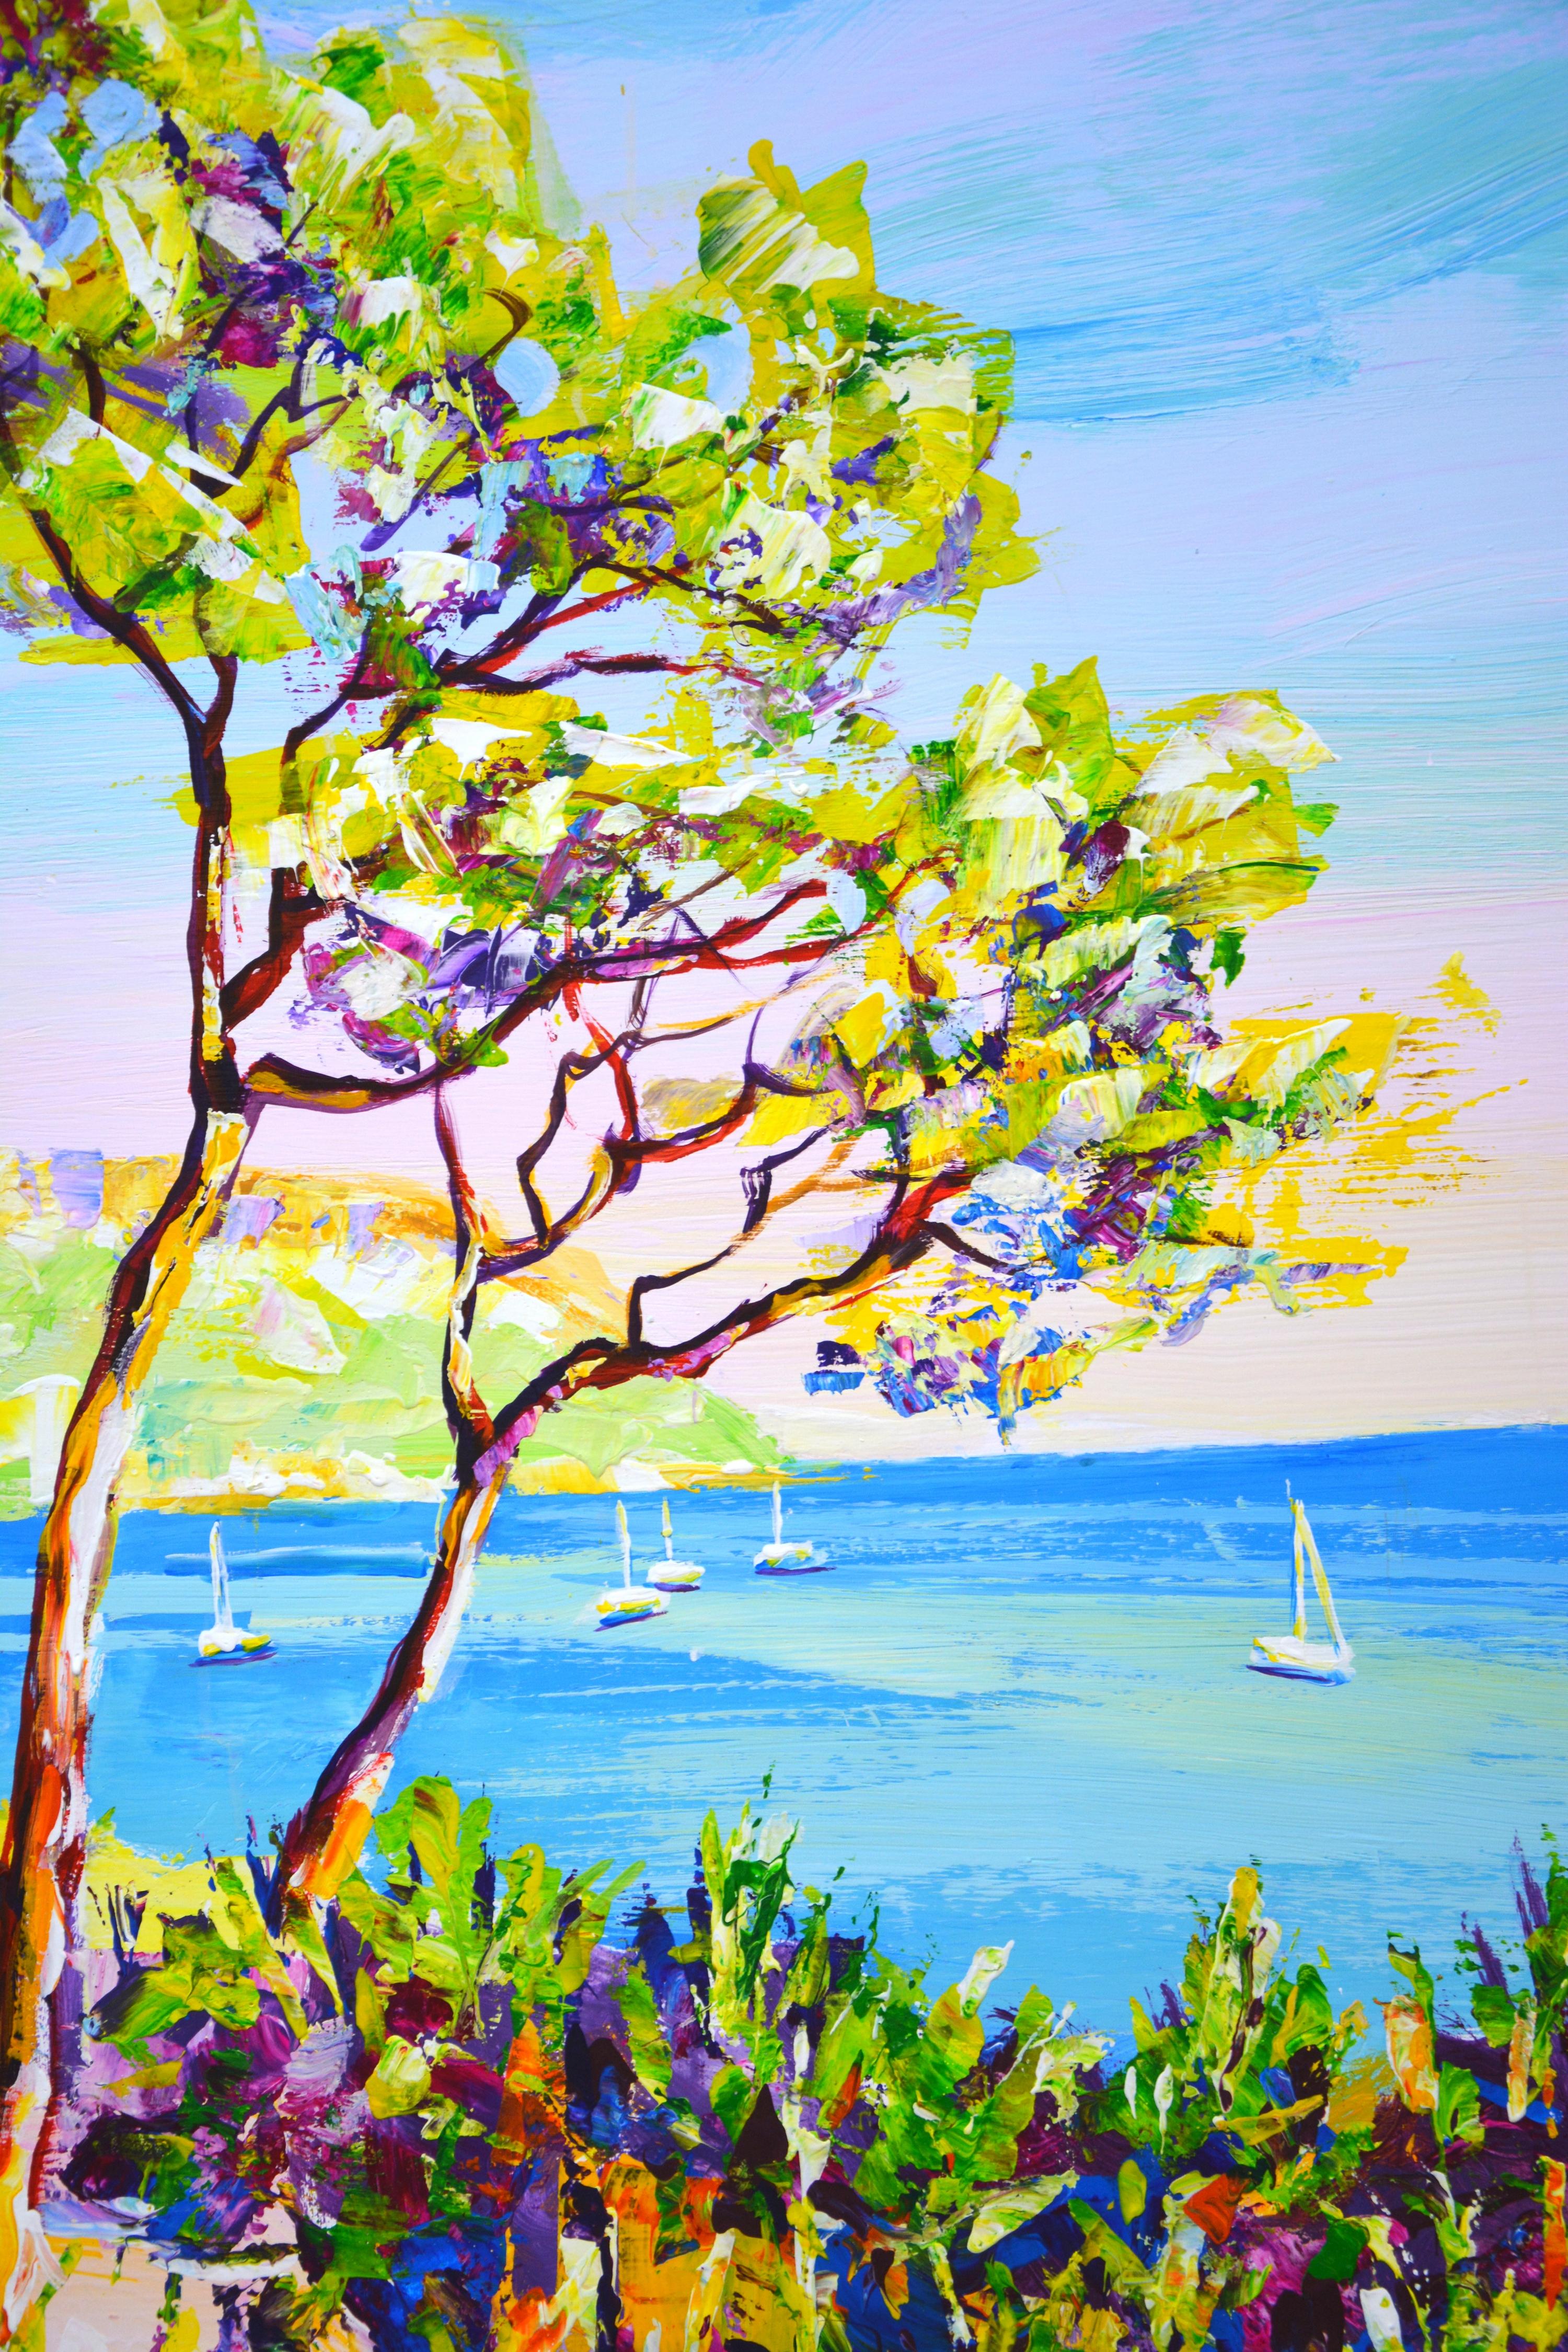 Azure coast. Seascape: a house on the Cote d'Azur of France, the sea, yachts, trees, flowers, a sunny day, water, travel, create an atmosphere of romance and relaxation. Impressionism. Realism. High quality materials are used. The painting is